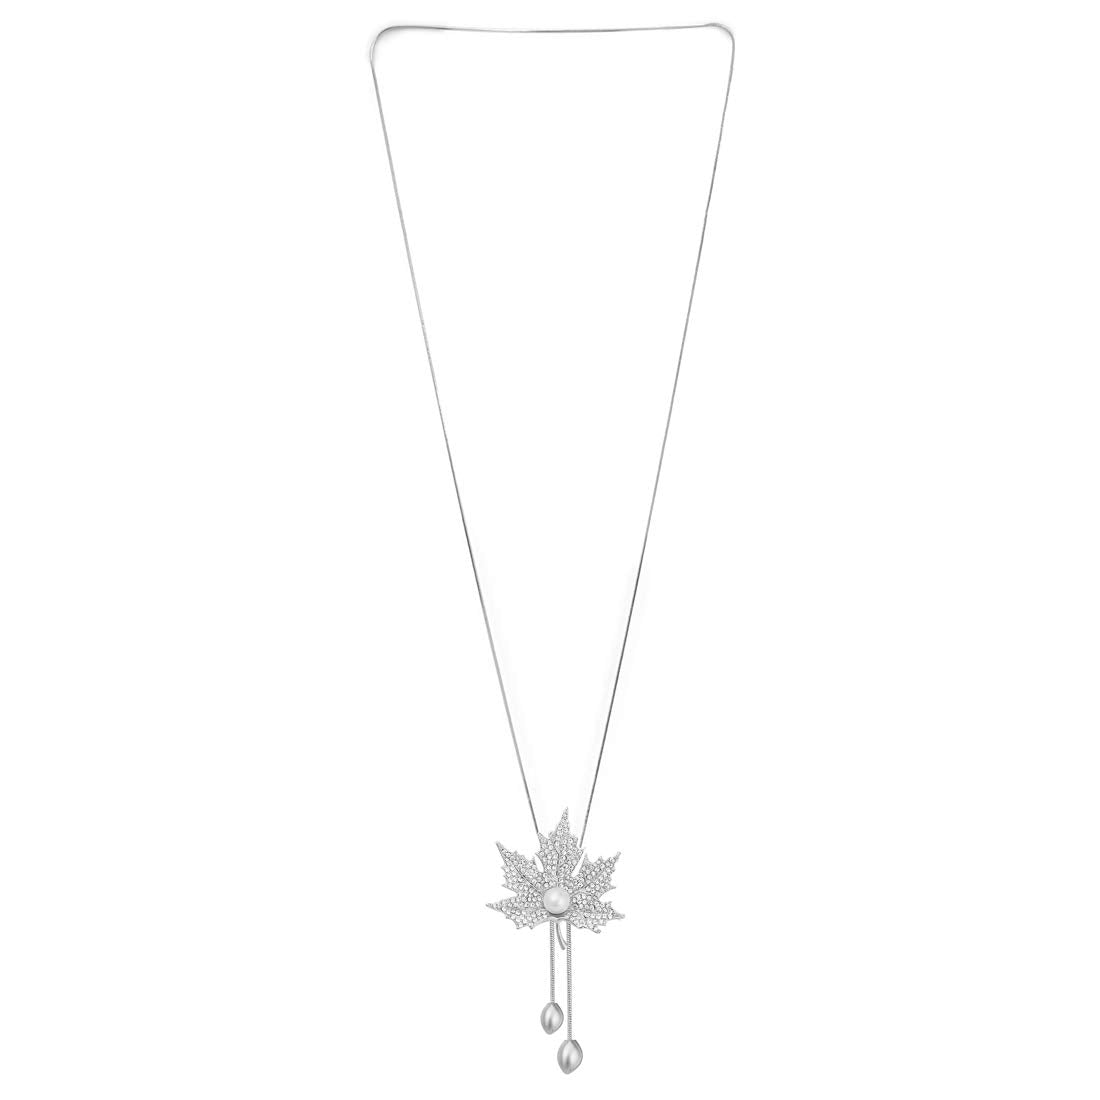 Yellow Chimes Long Chain Necklace for Girls Maple Leaf Silver Long Chain Pendant Necklace for Womena and Girls